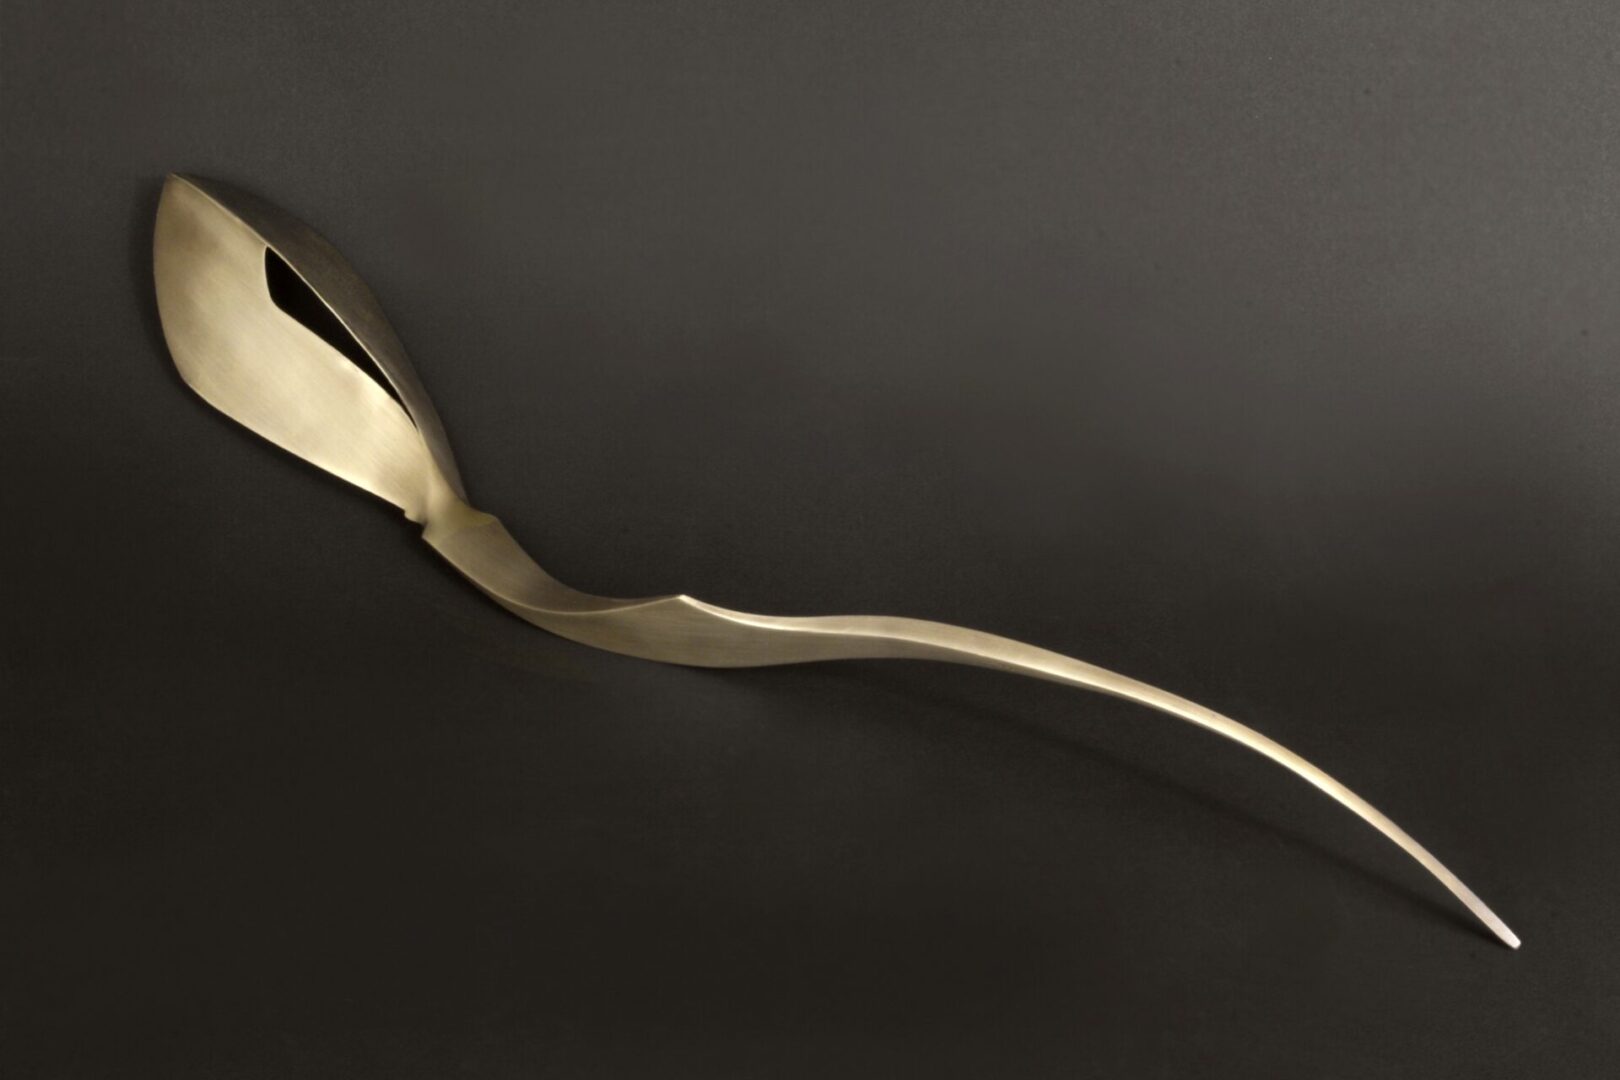 A gold swan-shaped object rests on a black surface, crafted by Ira Sherman Jewelry.